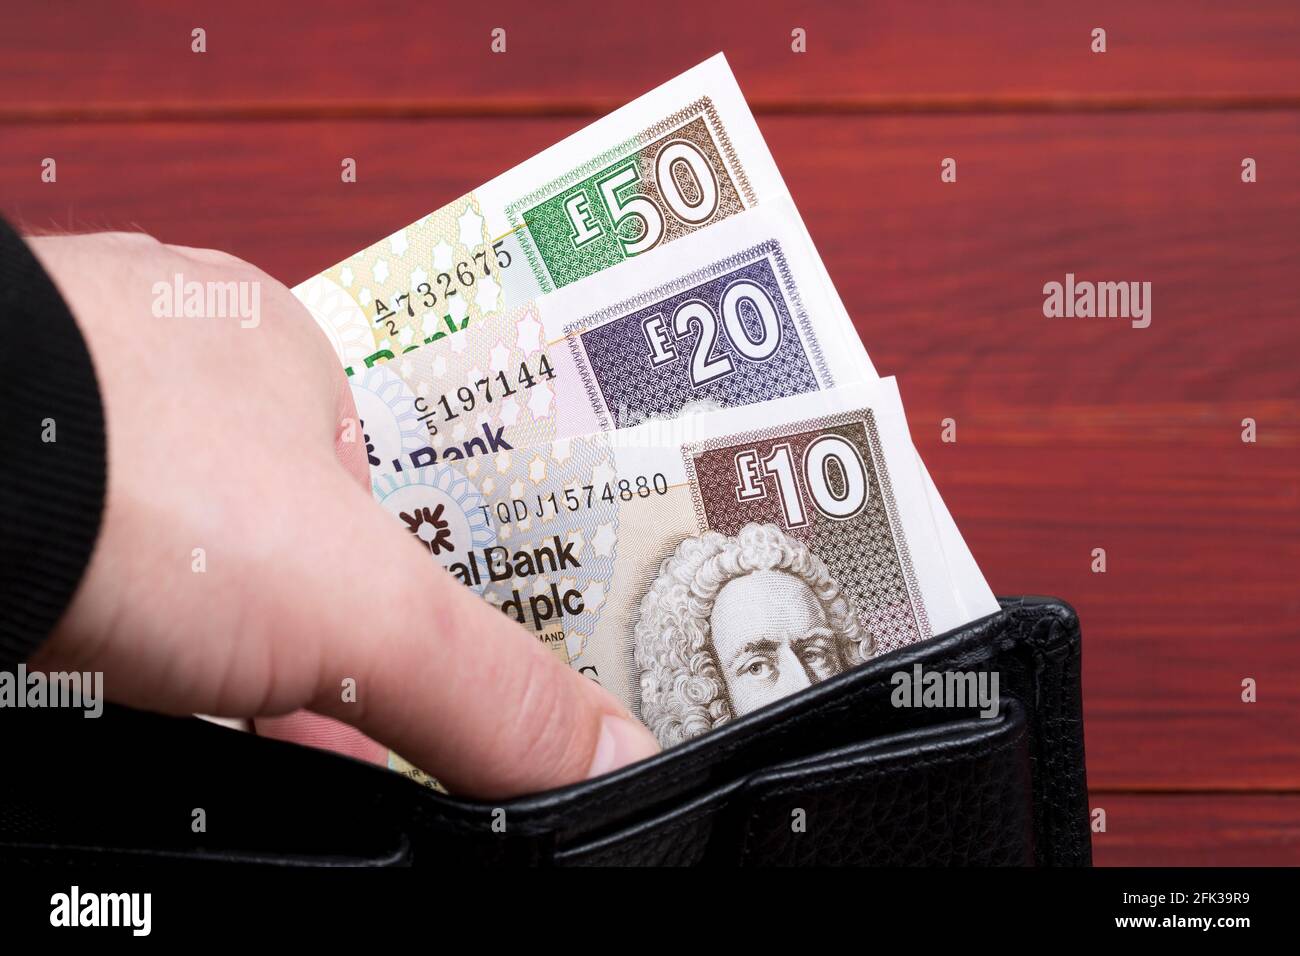 Scottish money - Pounds in a black wallet Stock Photo